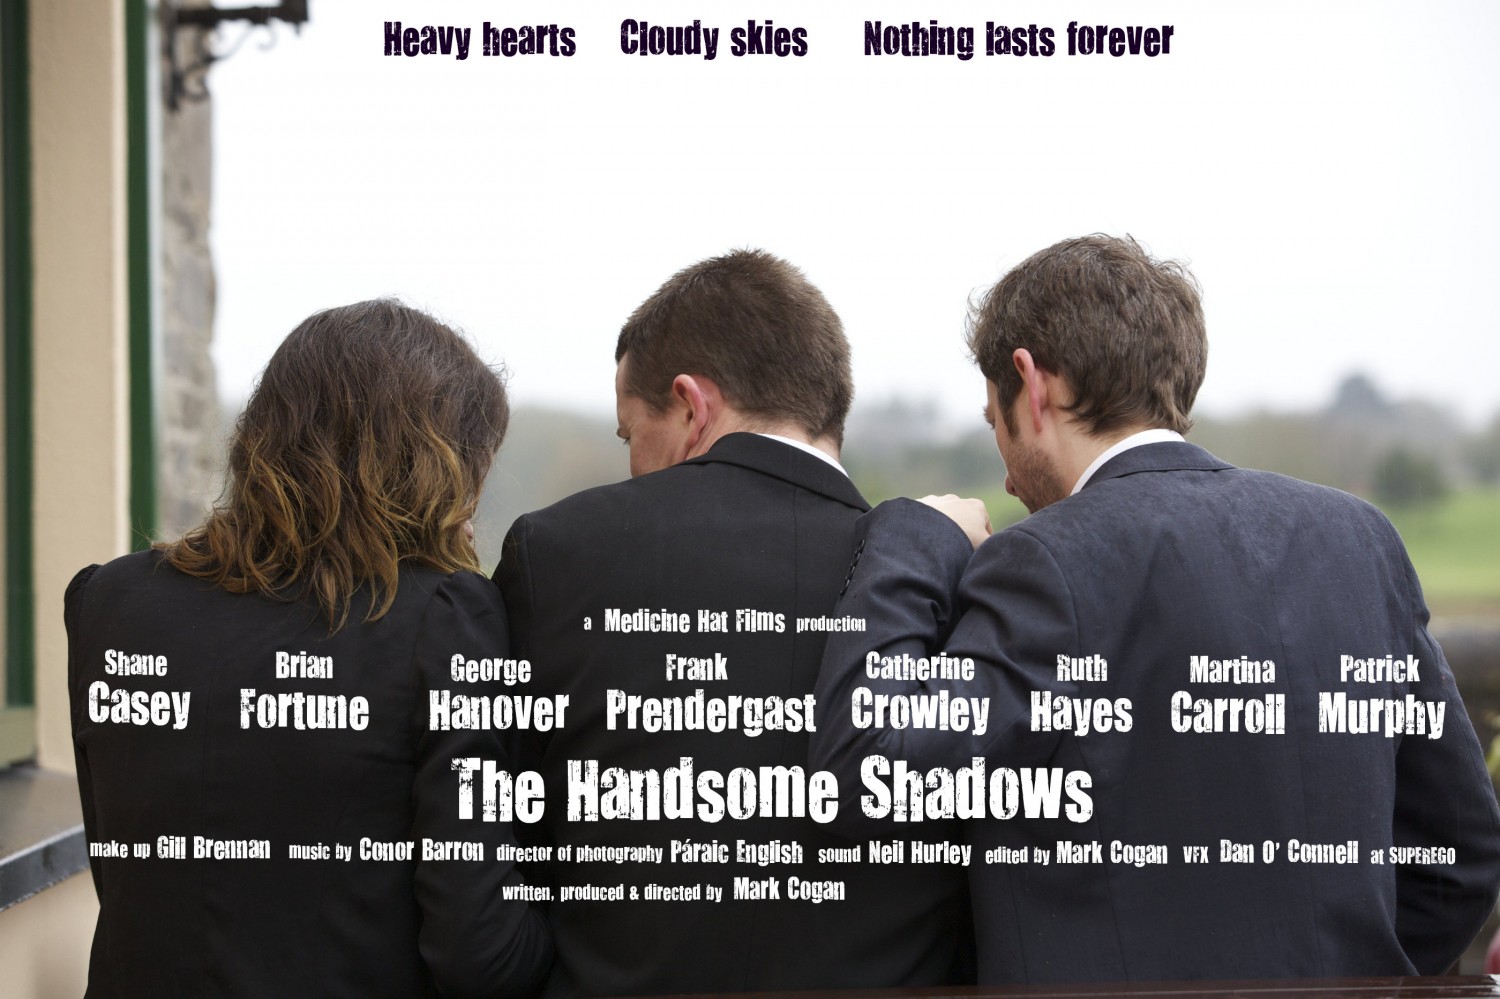 Extra Large Movie Poster Image for The Handsome Shadows